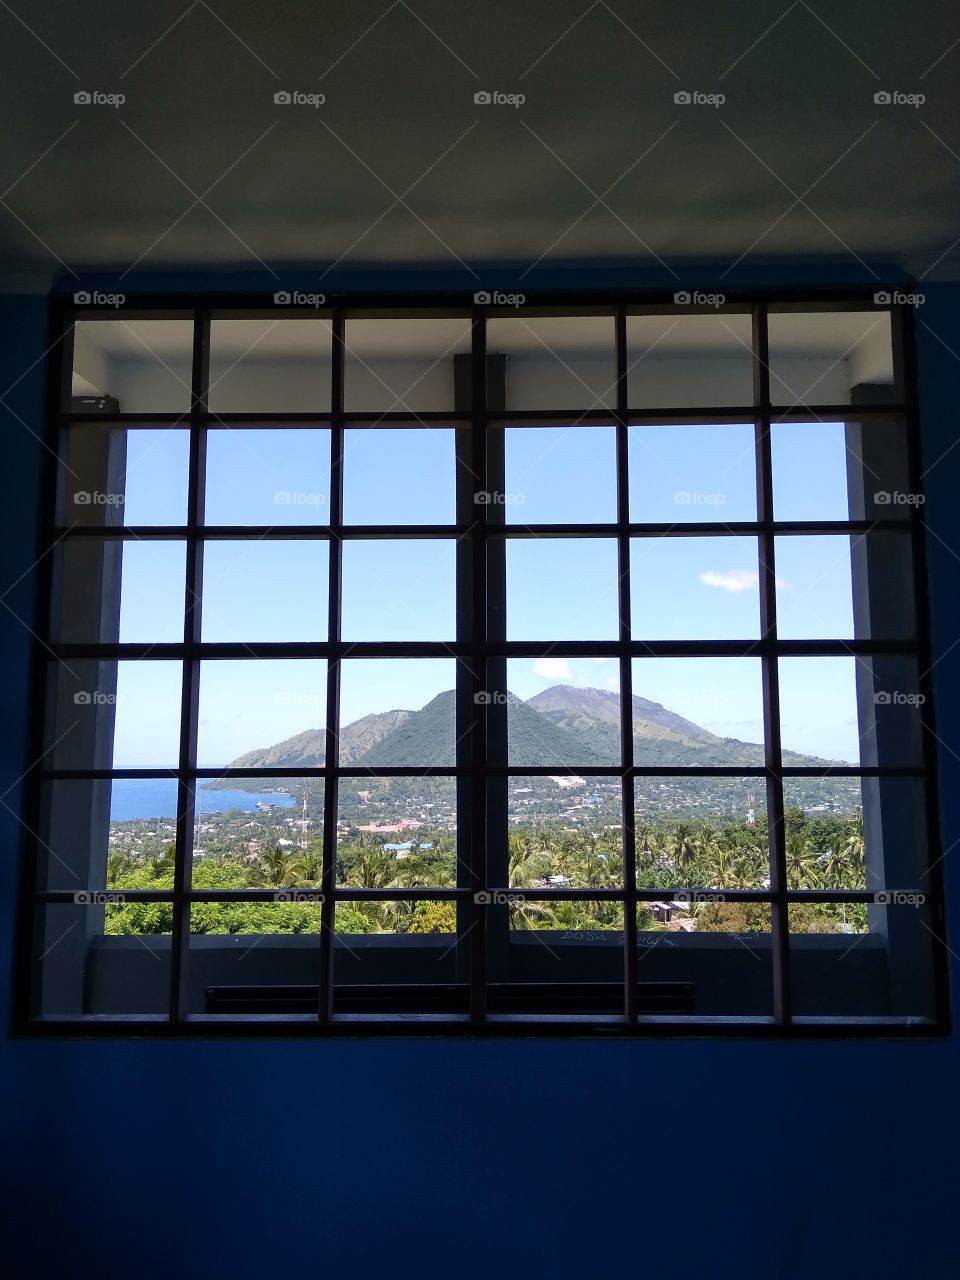 Other side of window